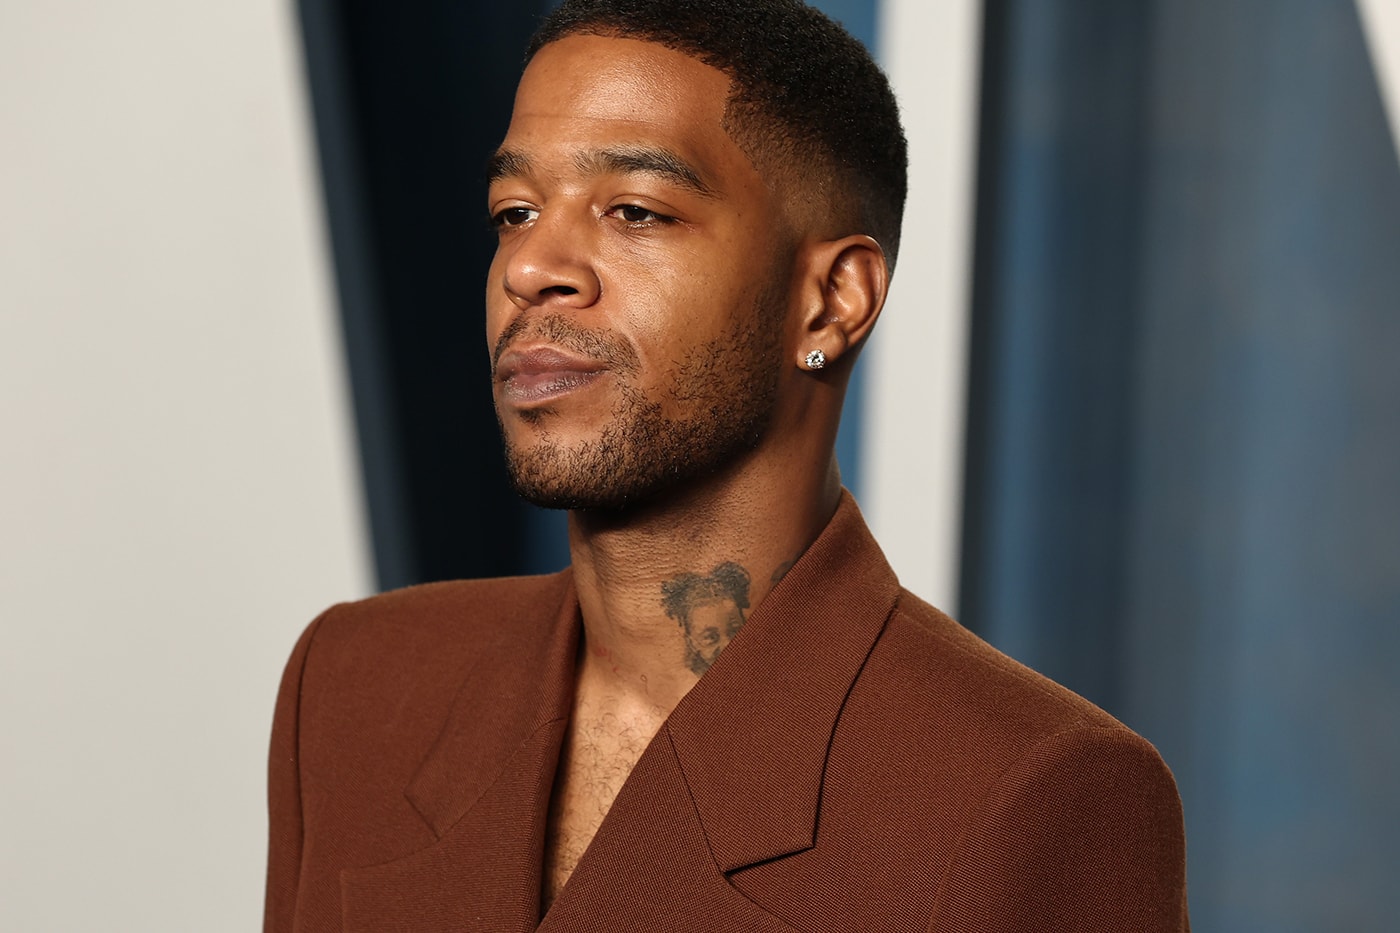 Kid Cudi Claims Pusha T Song Is His Last kanye west Collab